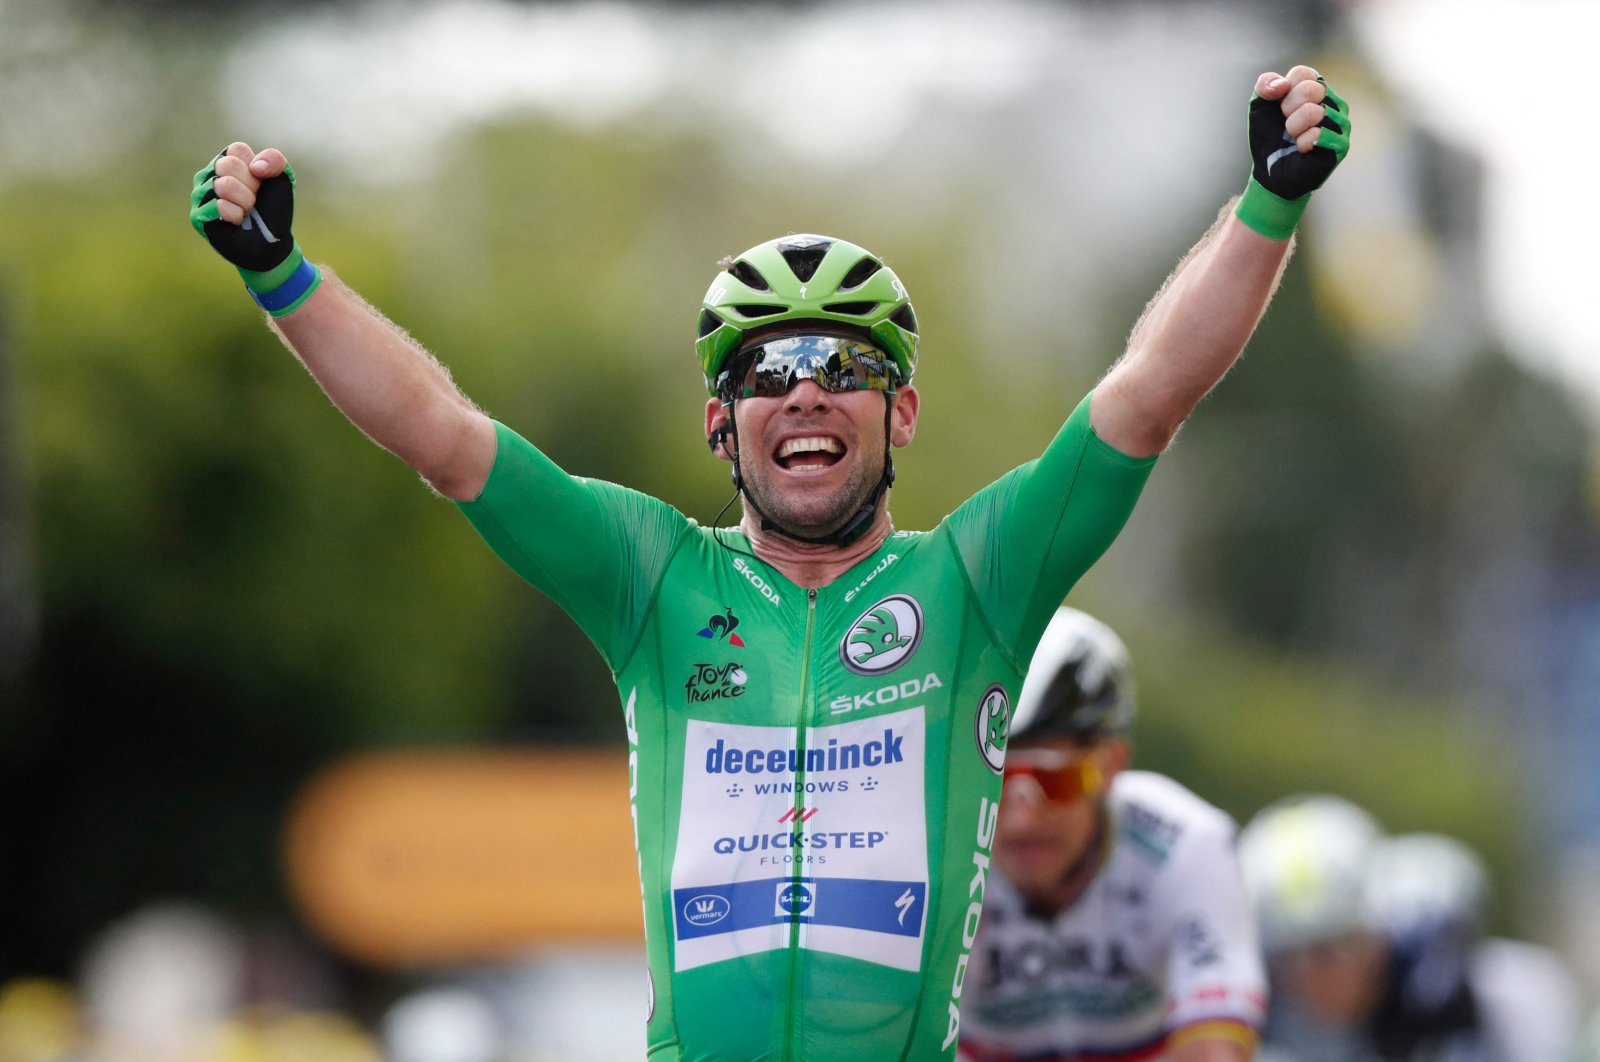 Team Deceuninck Quickstep's Mark Cavendish of Great Britain celebrates as he crosses the finish line of the 6th stage of the 108th edition of the Tour de France cycling race, 160 km between Tours and Chateauroux, July 1, 2021. (AFP Photo)